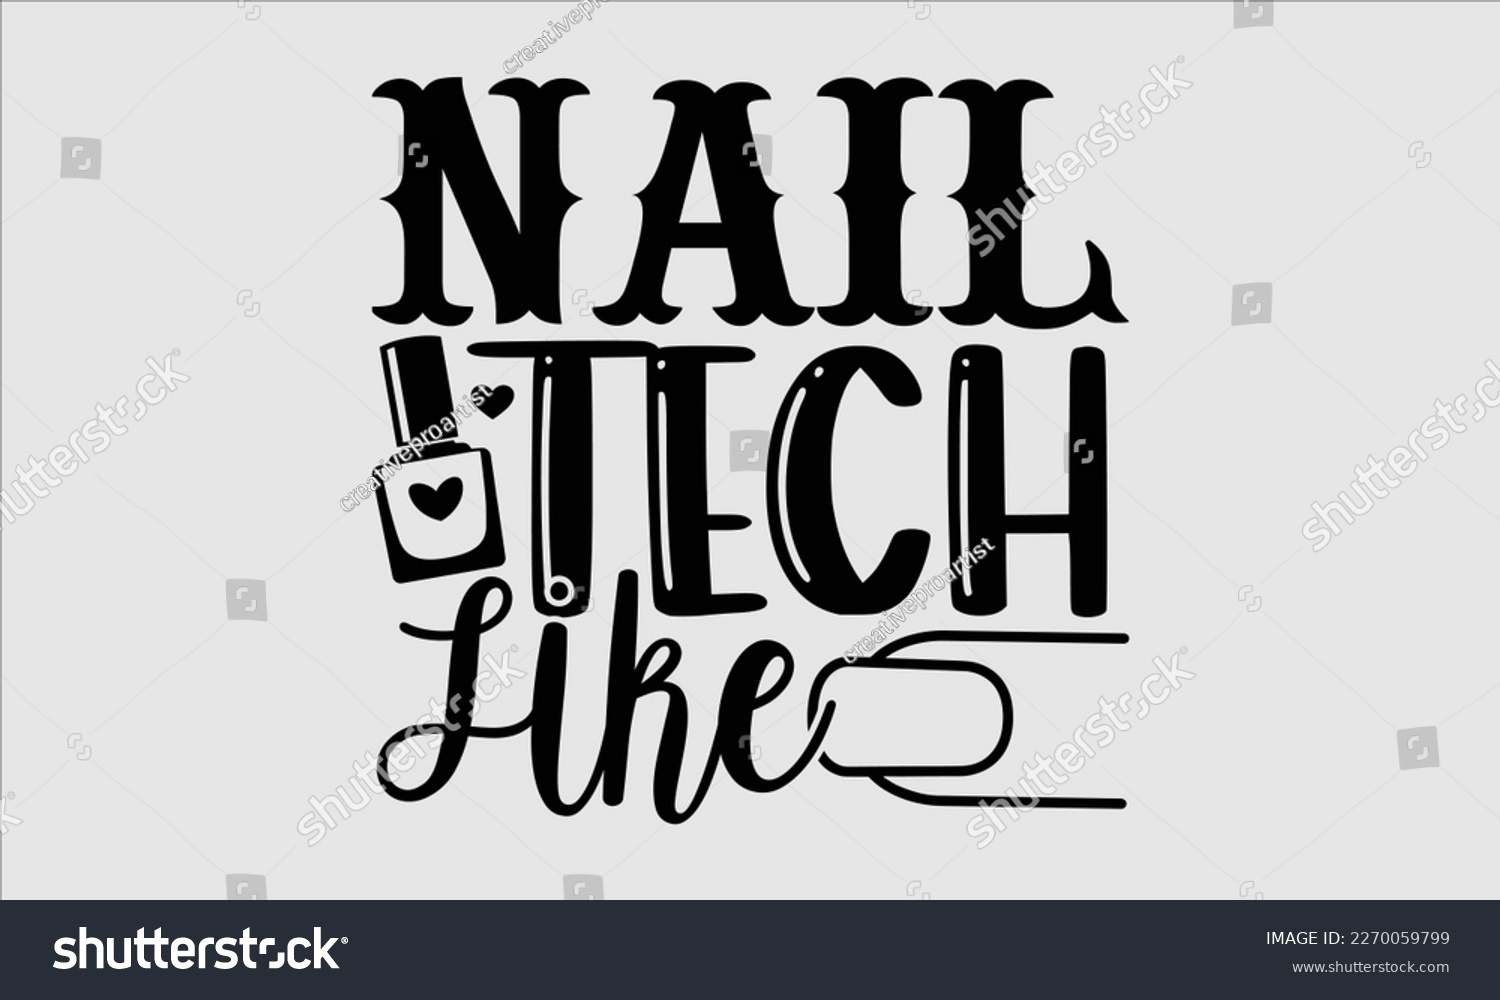 SVG of Nail tech like- Nail Tech t shirts design, Hand written lettering phrase, Isolated on white background,  Calligraphy graphic for Cutting Machine, svg eps 10. svg